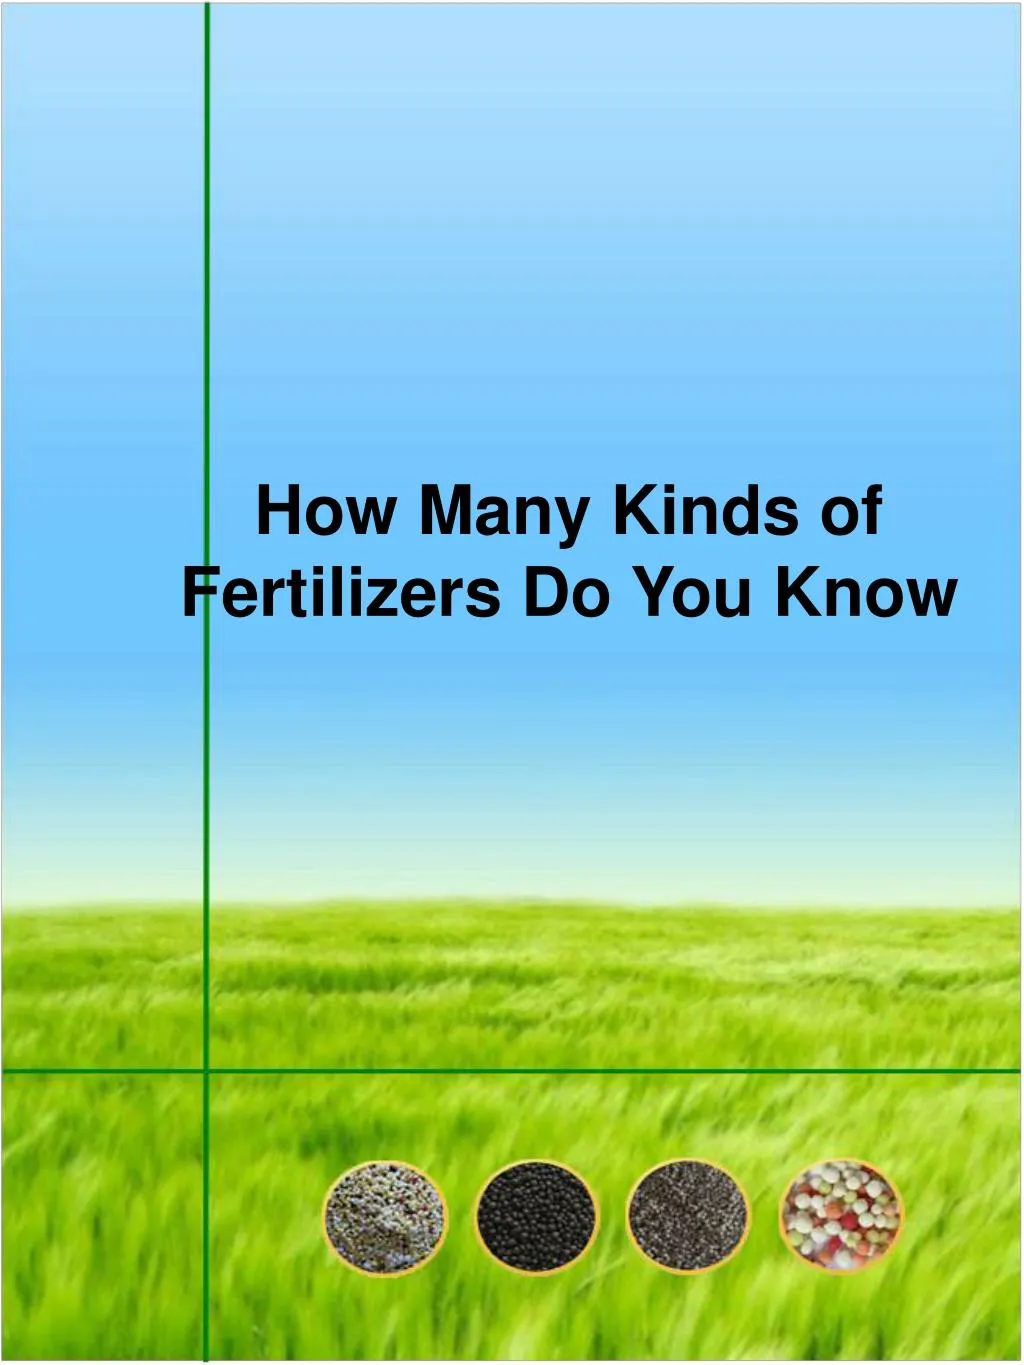 how many kinds of fertilizers do you know